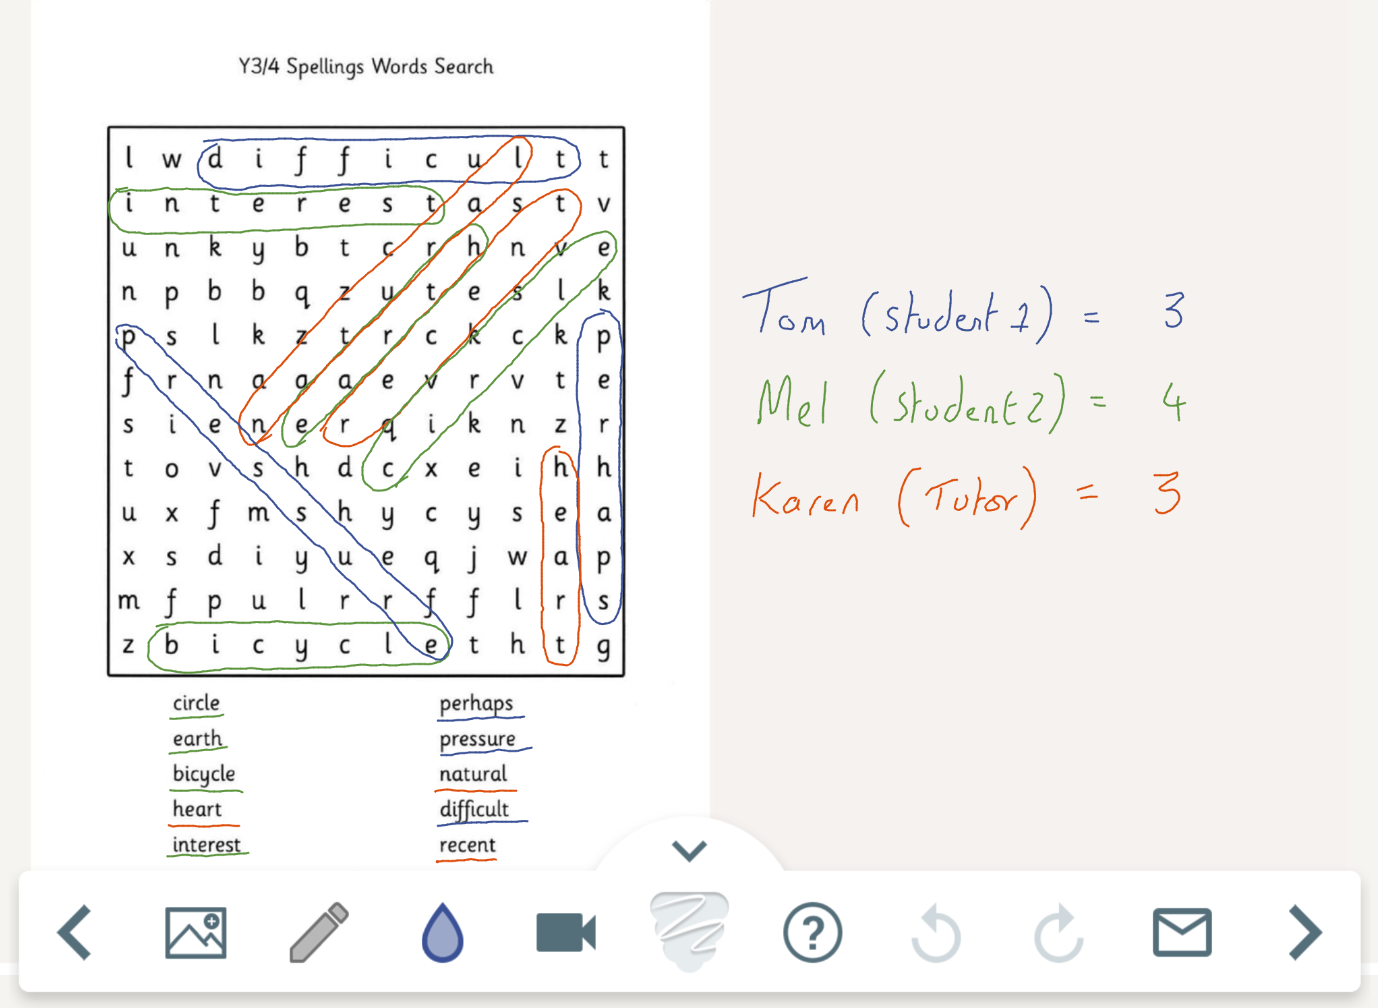 image showing a crossword game completed by students and tutor in Bramble.